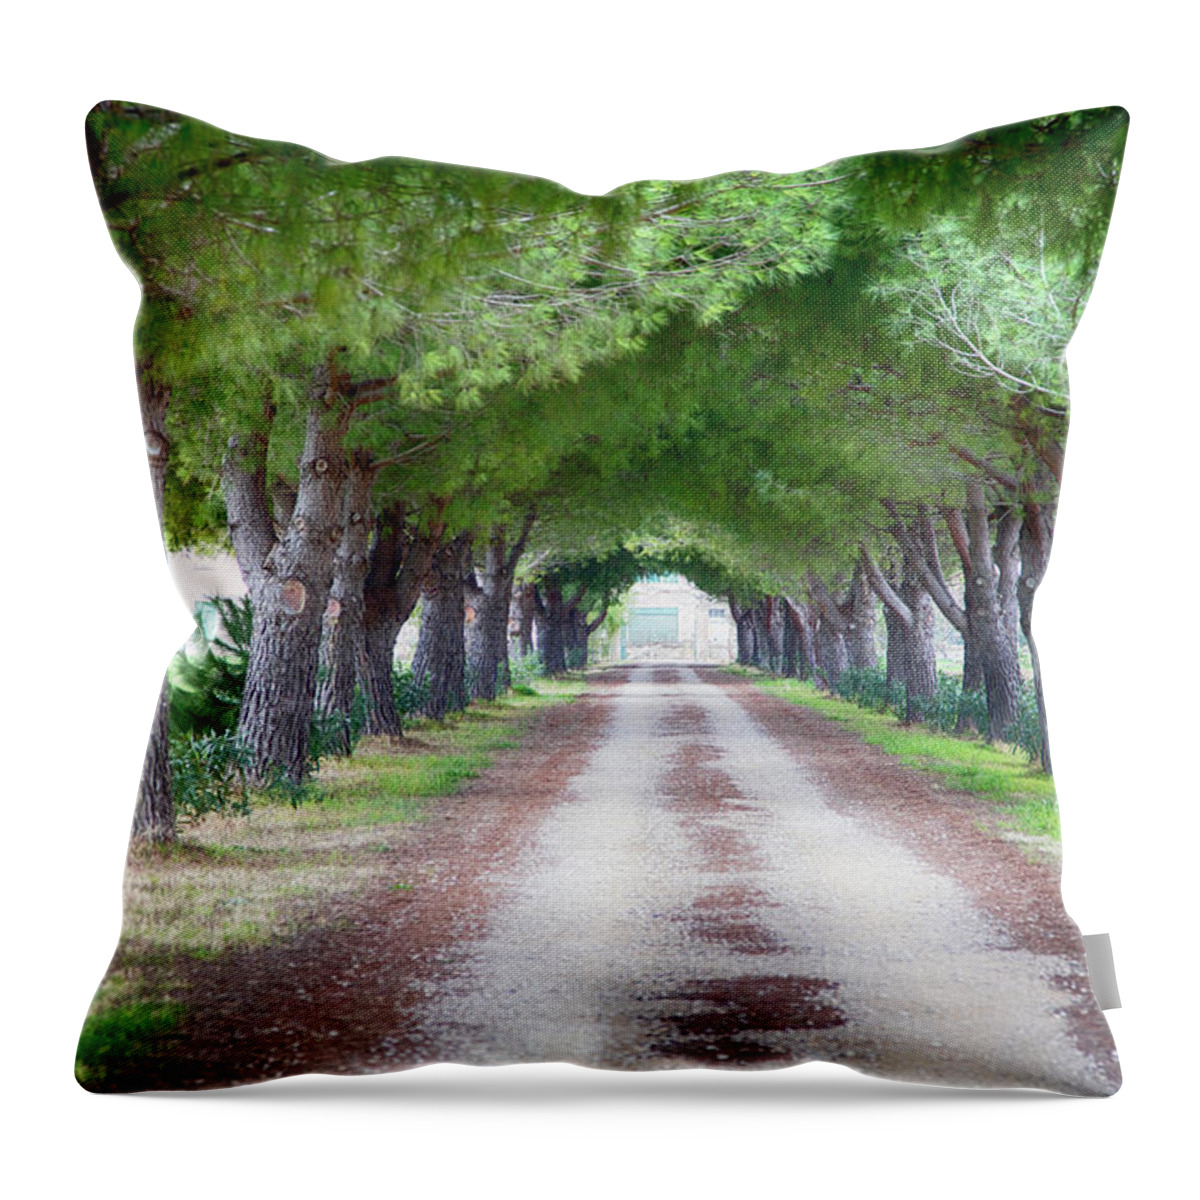 Vendres Throw Pillow featuring the photograph Country Lane Vendres France by Hugh Smith